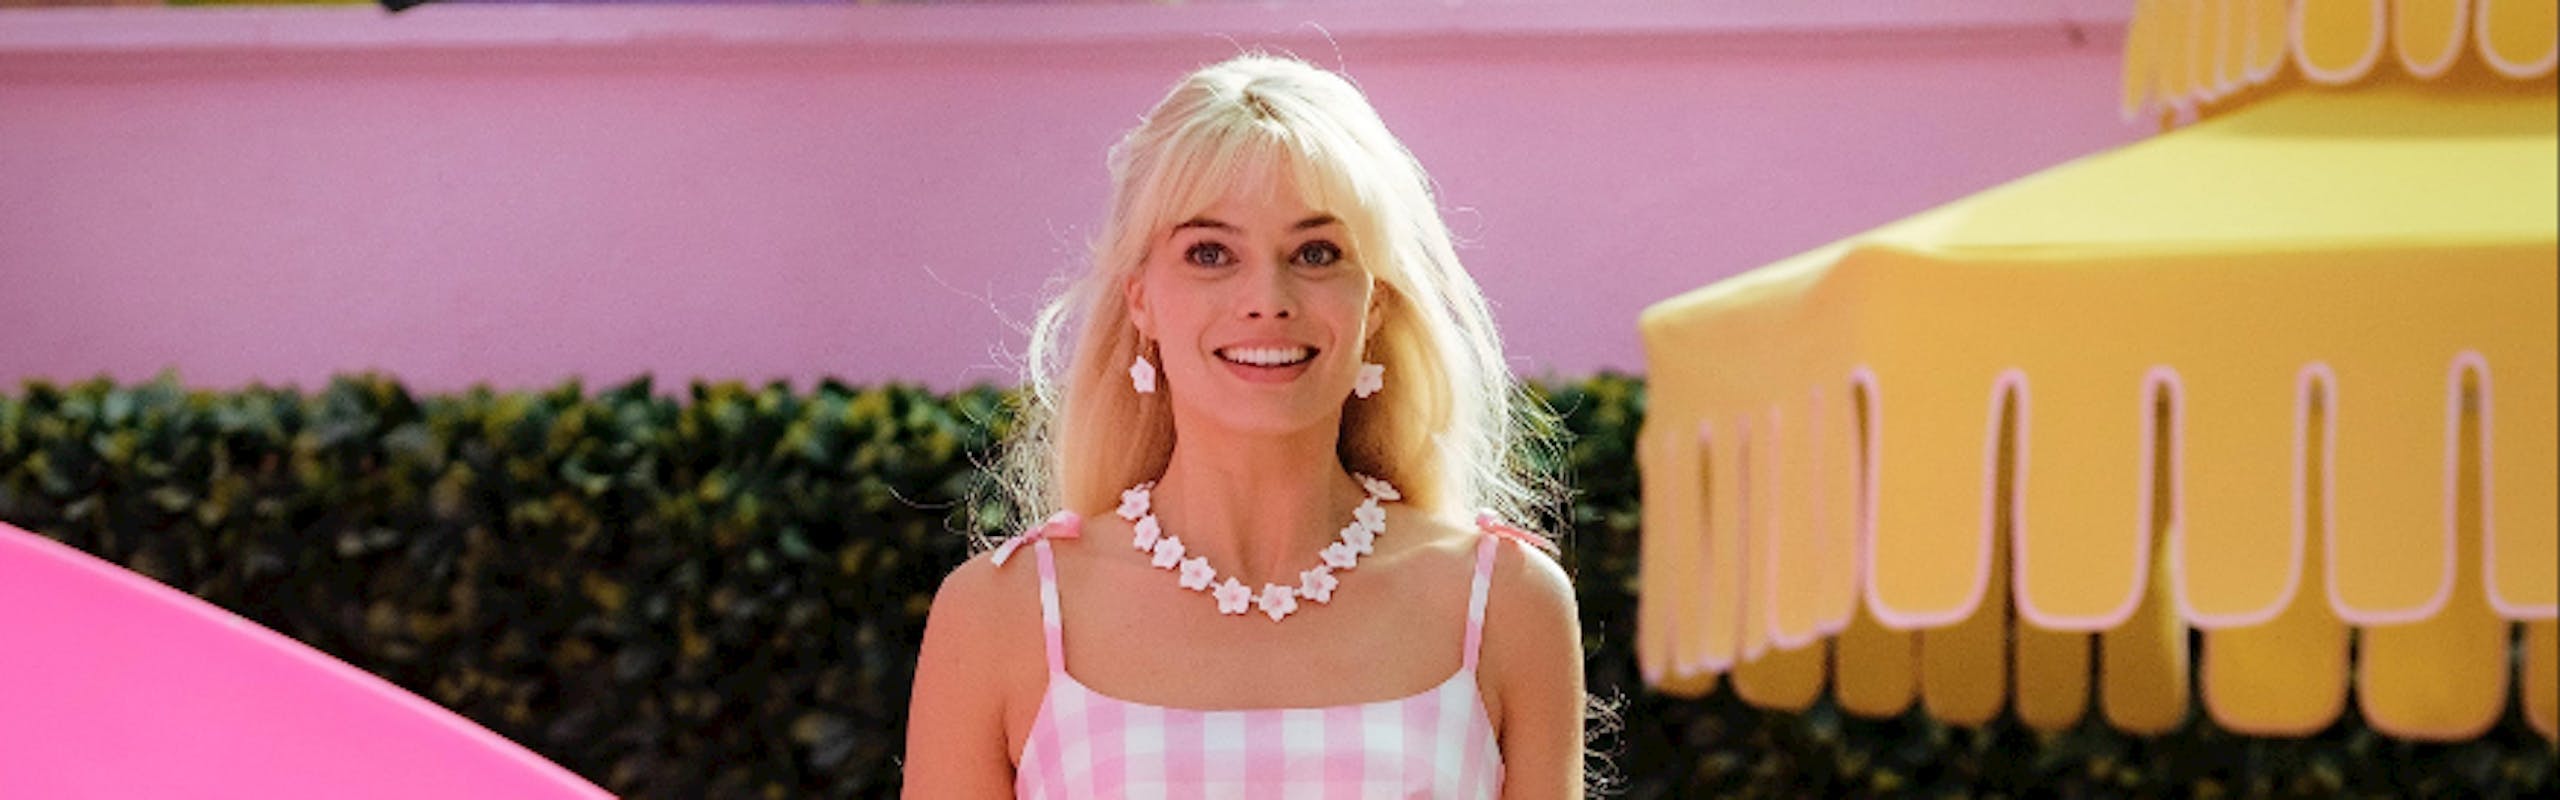 Margot Robbie in pink gingham dress Barbie movie outfits